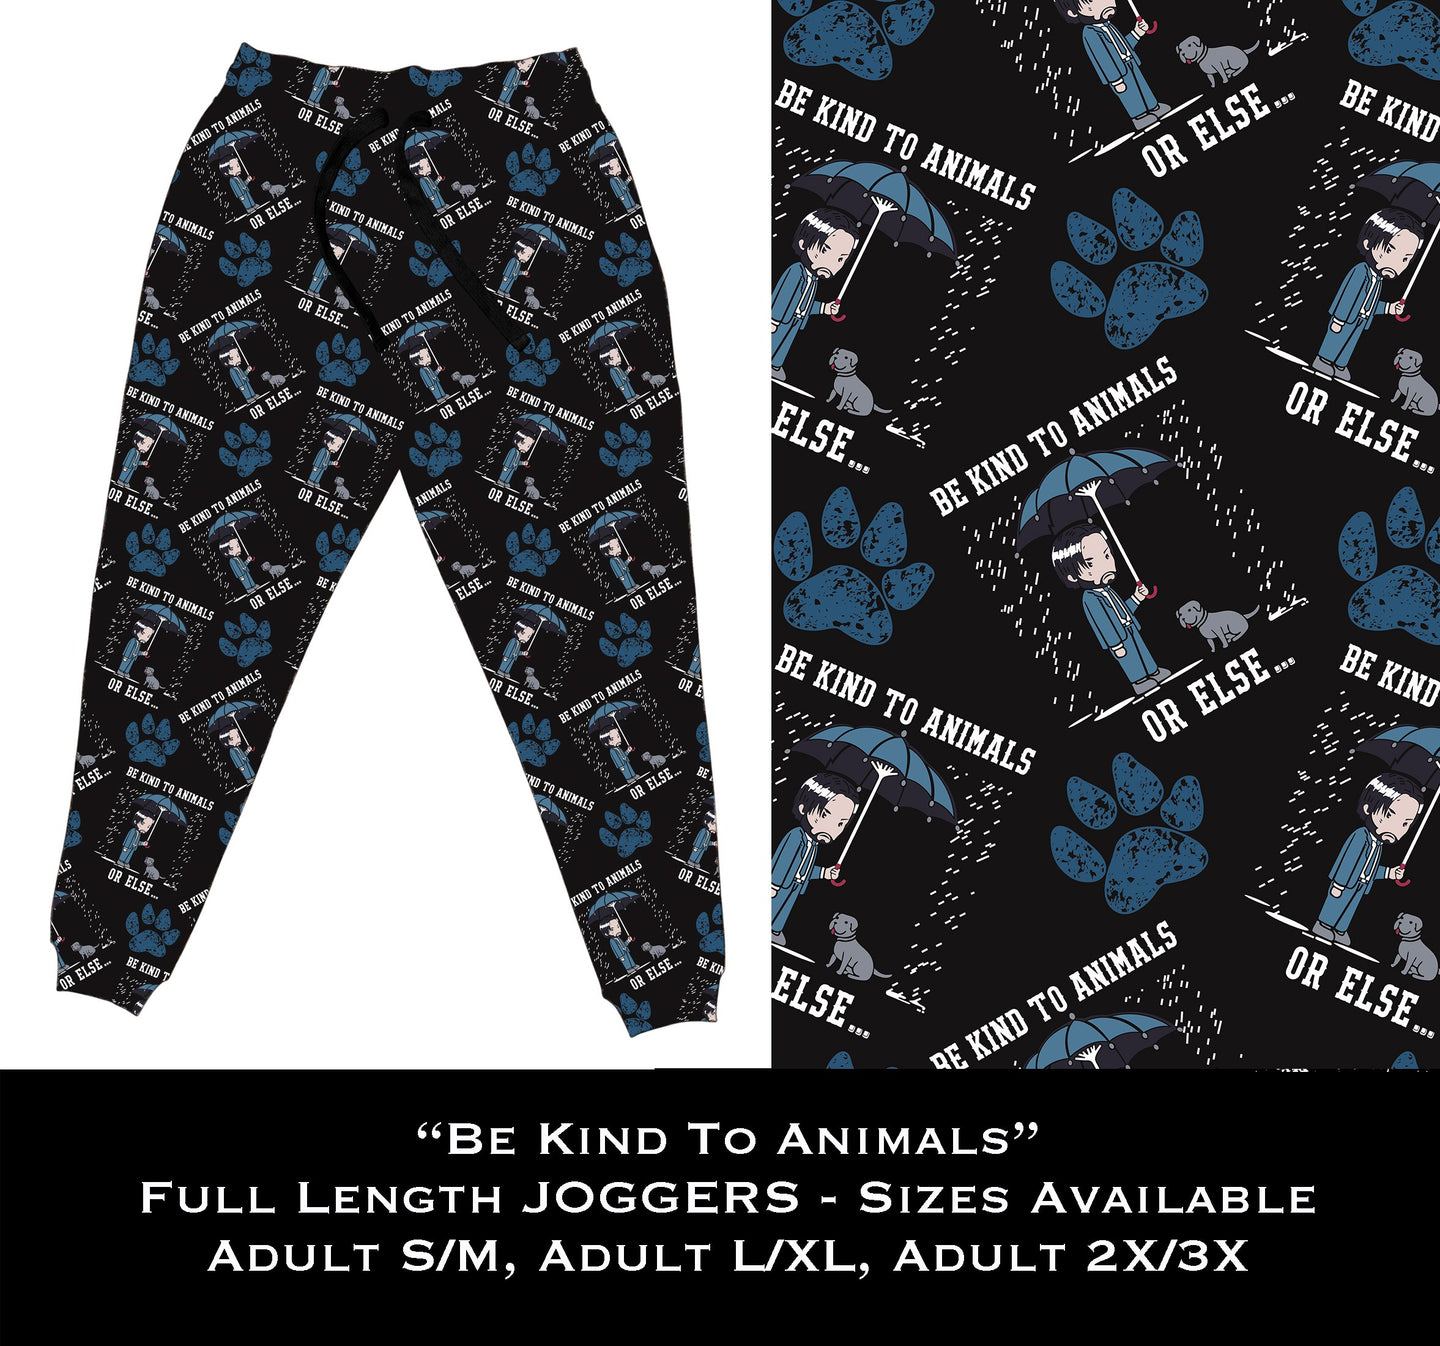 Be Kind To Animals - Full Length Joggers